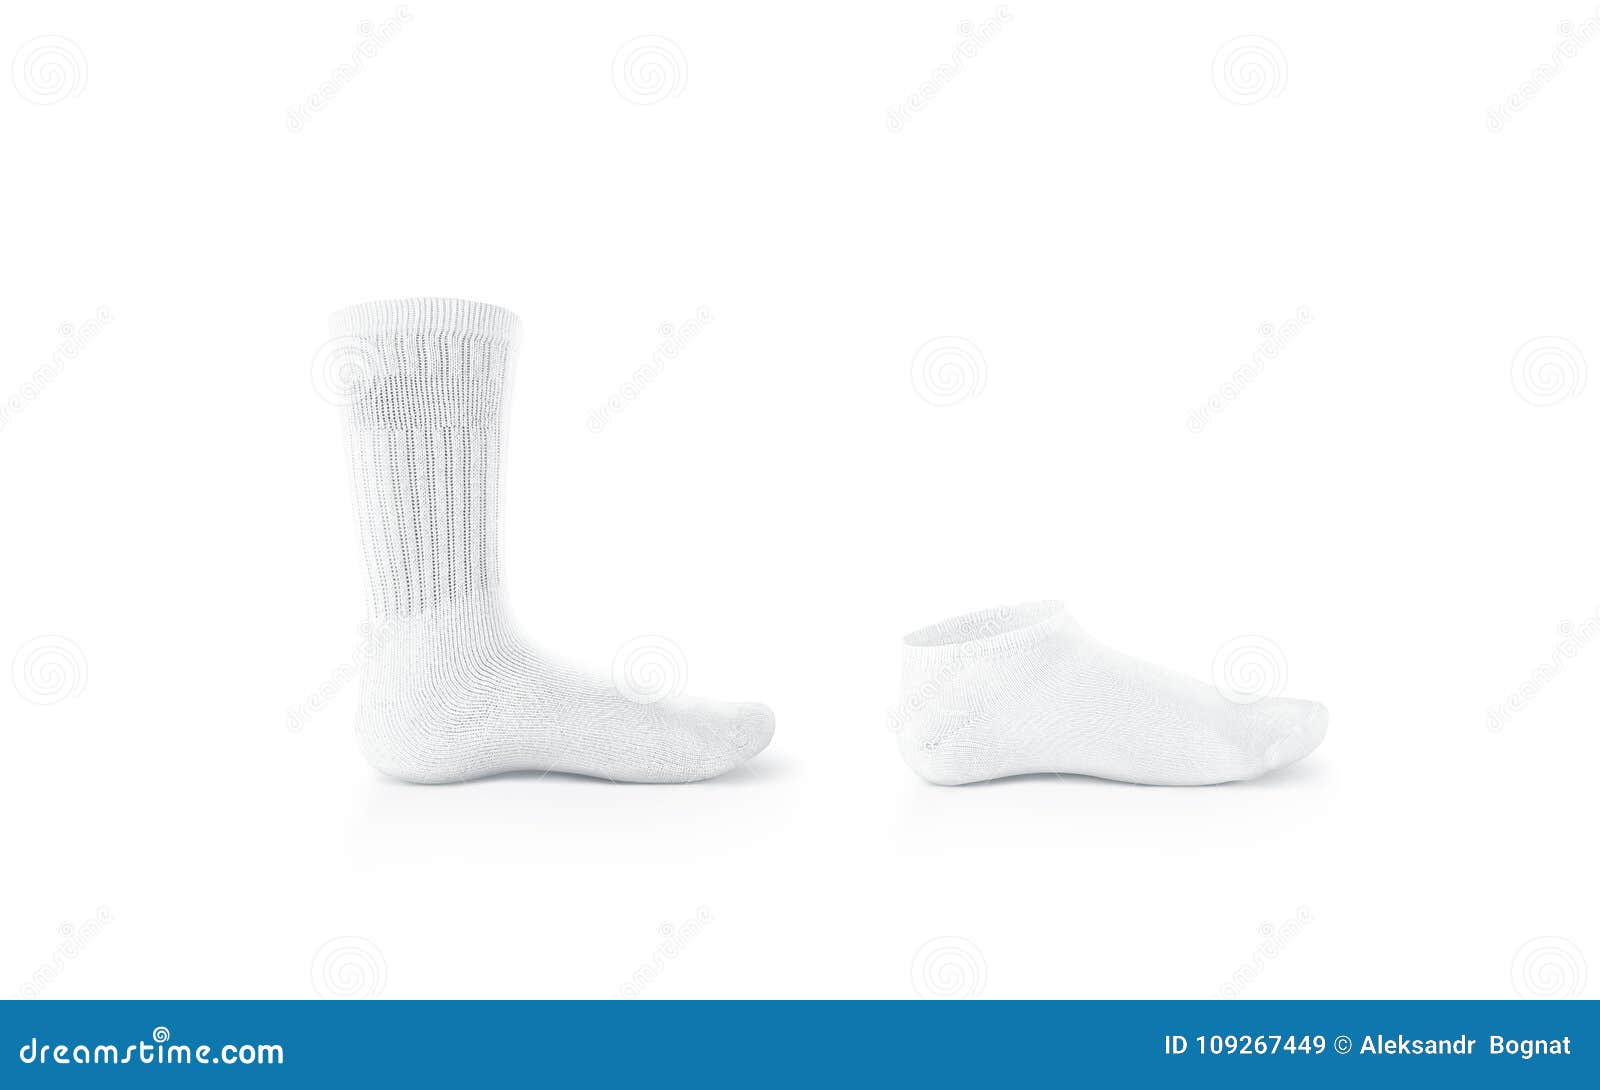 Download Blank White Socks Design Mockup, Isolated, Clipping Path ...